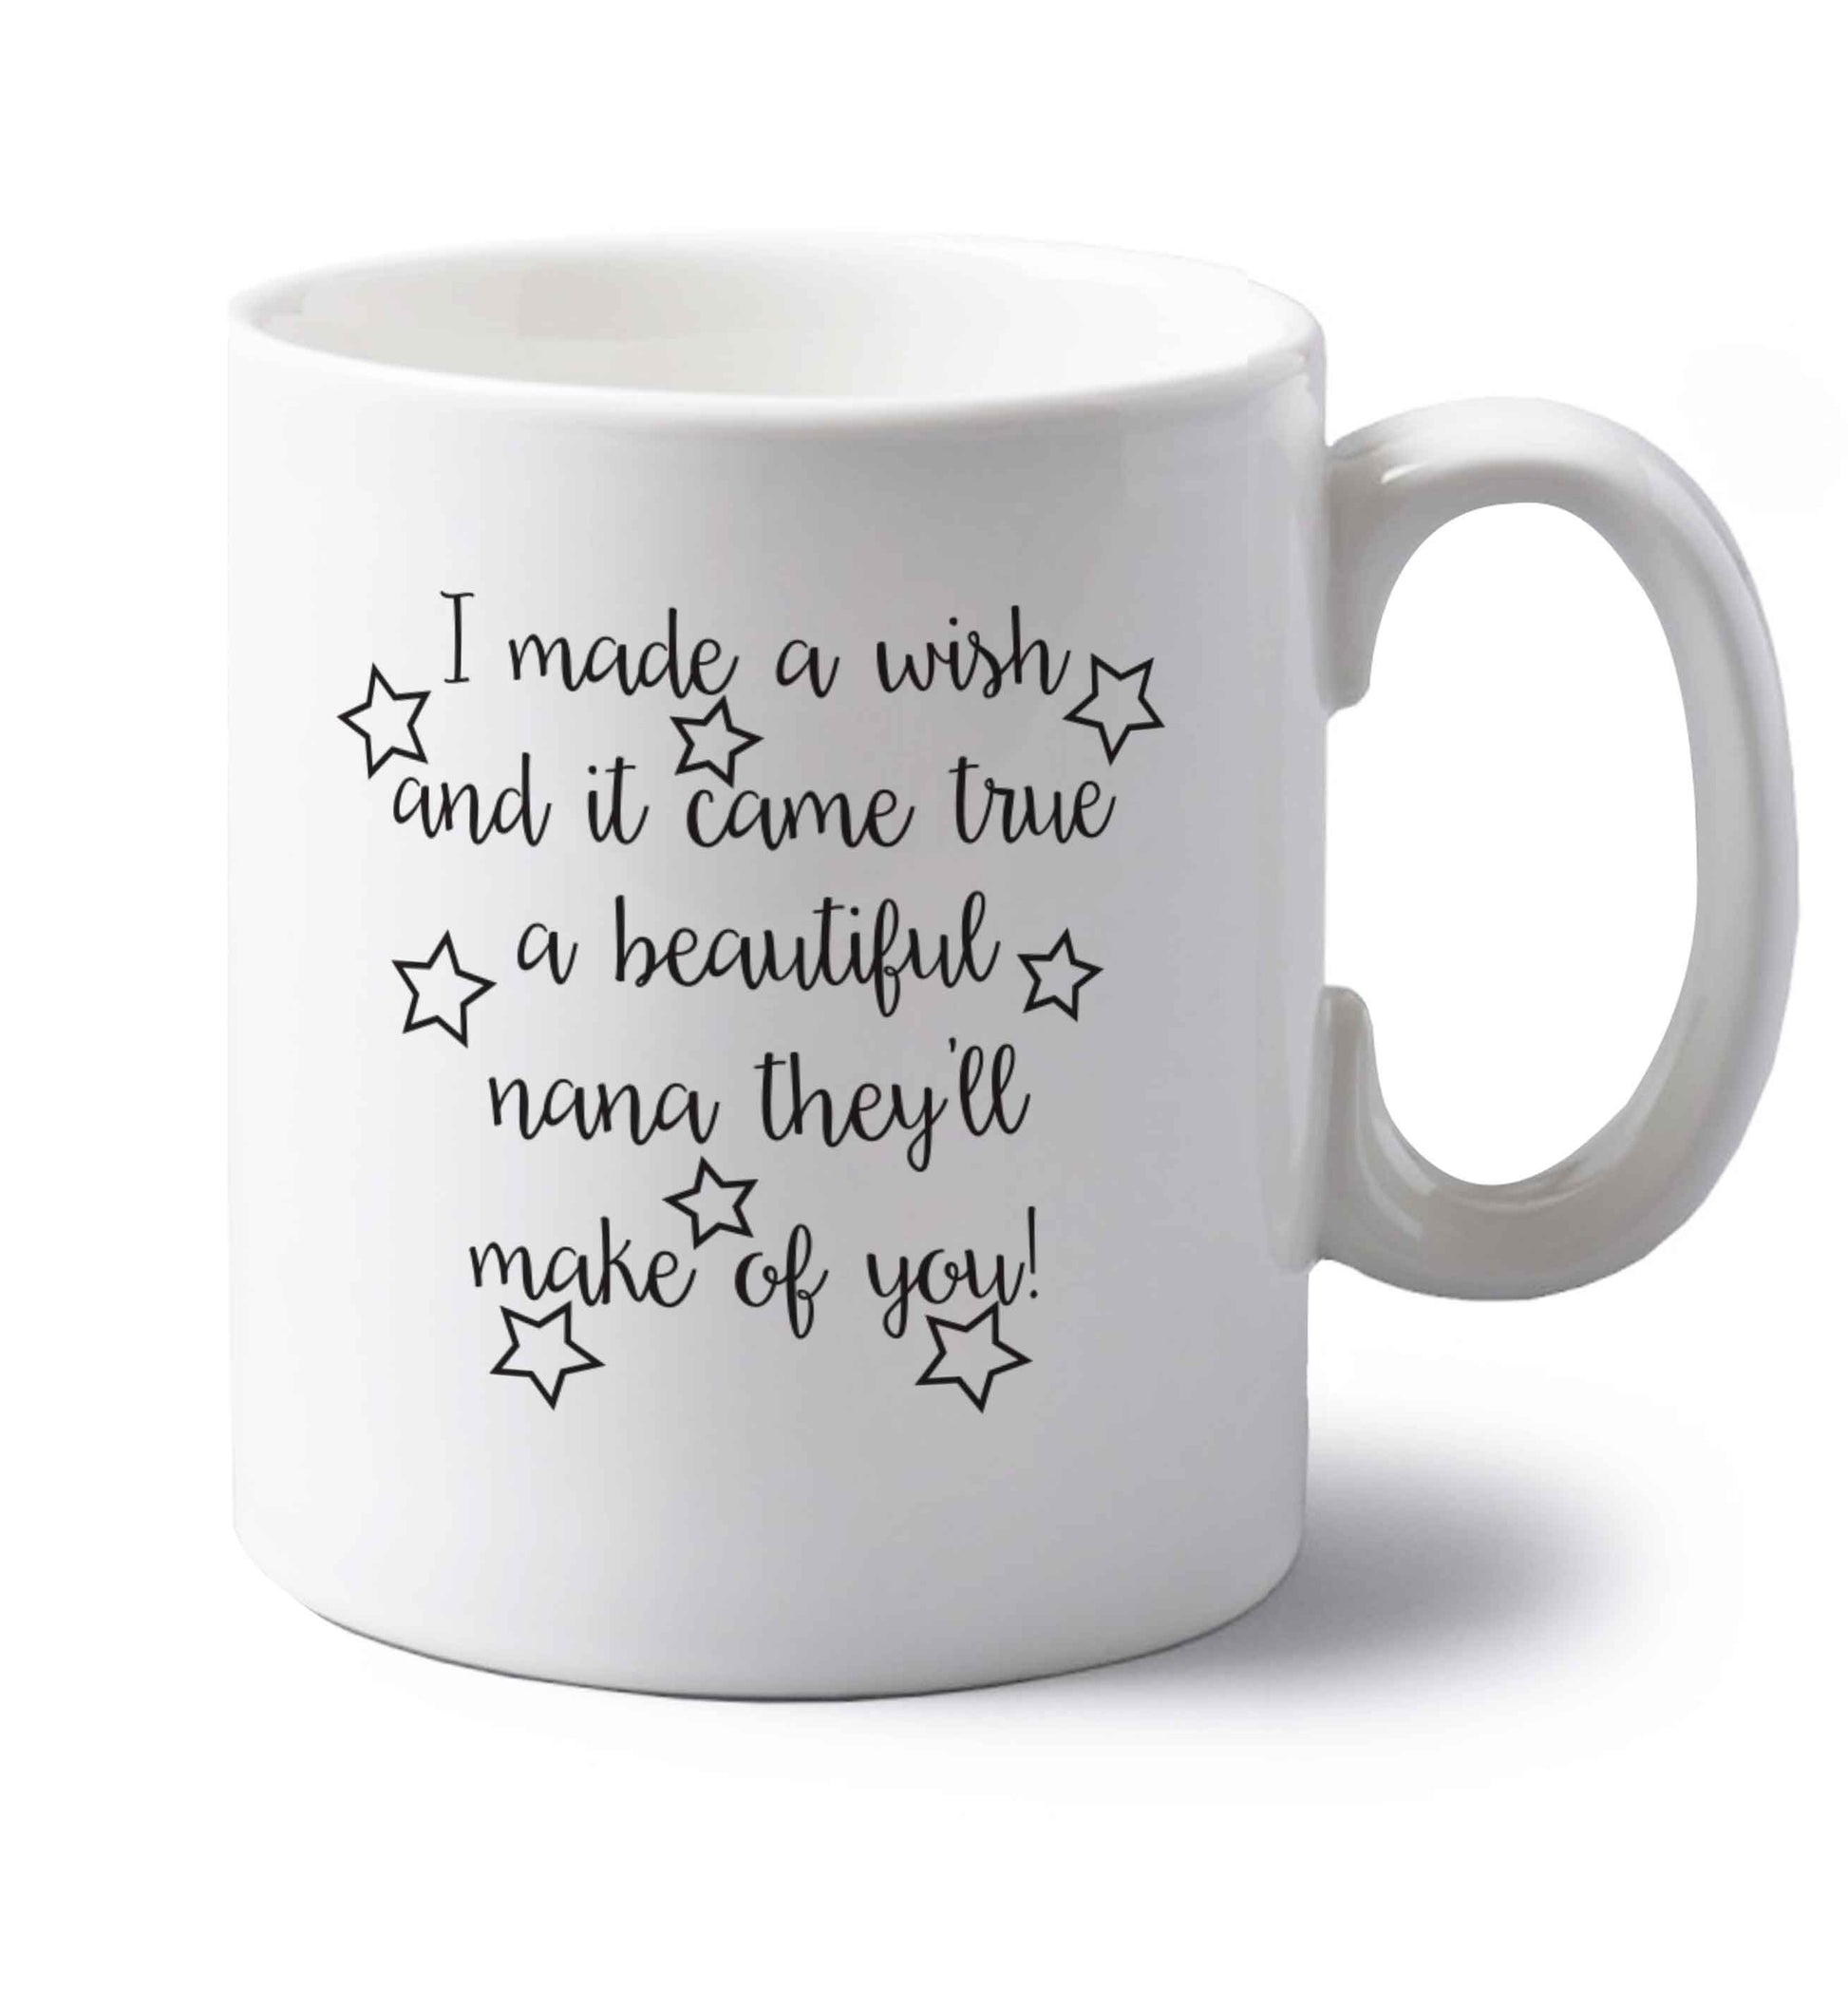 I made a wish and it came true a beautiful nana they'll make of you! left handed white ceramic mug 